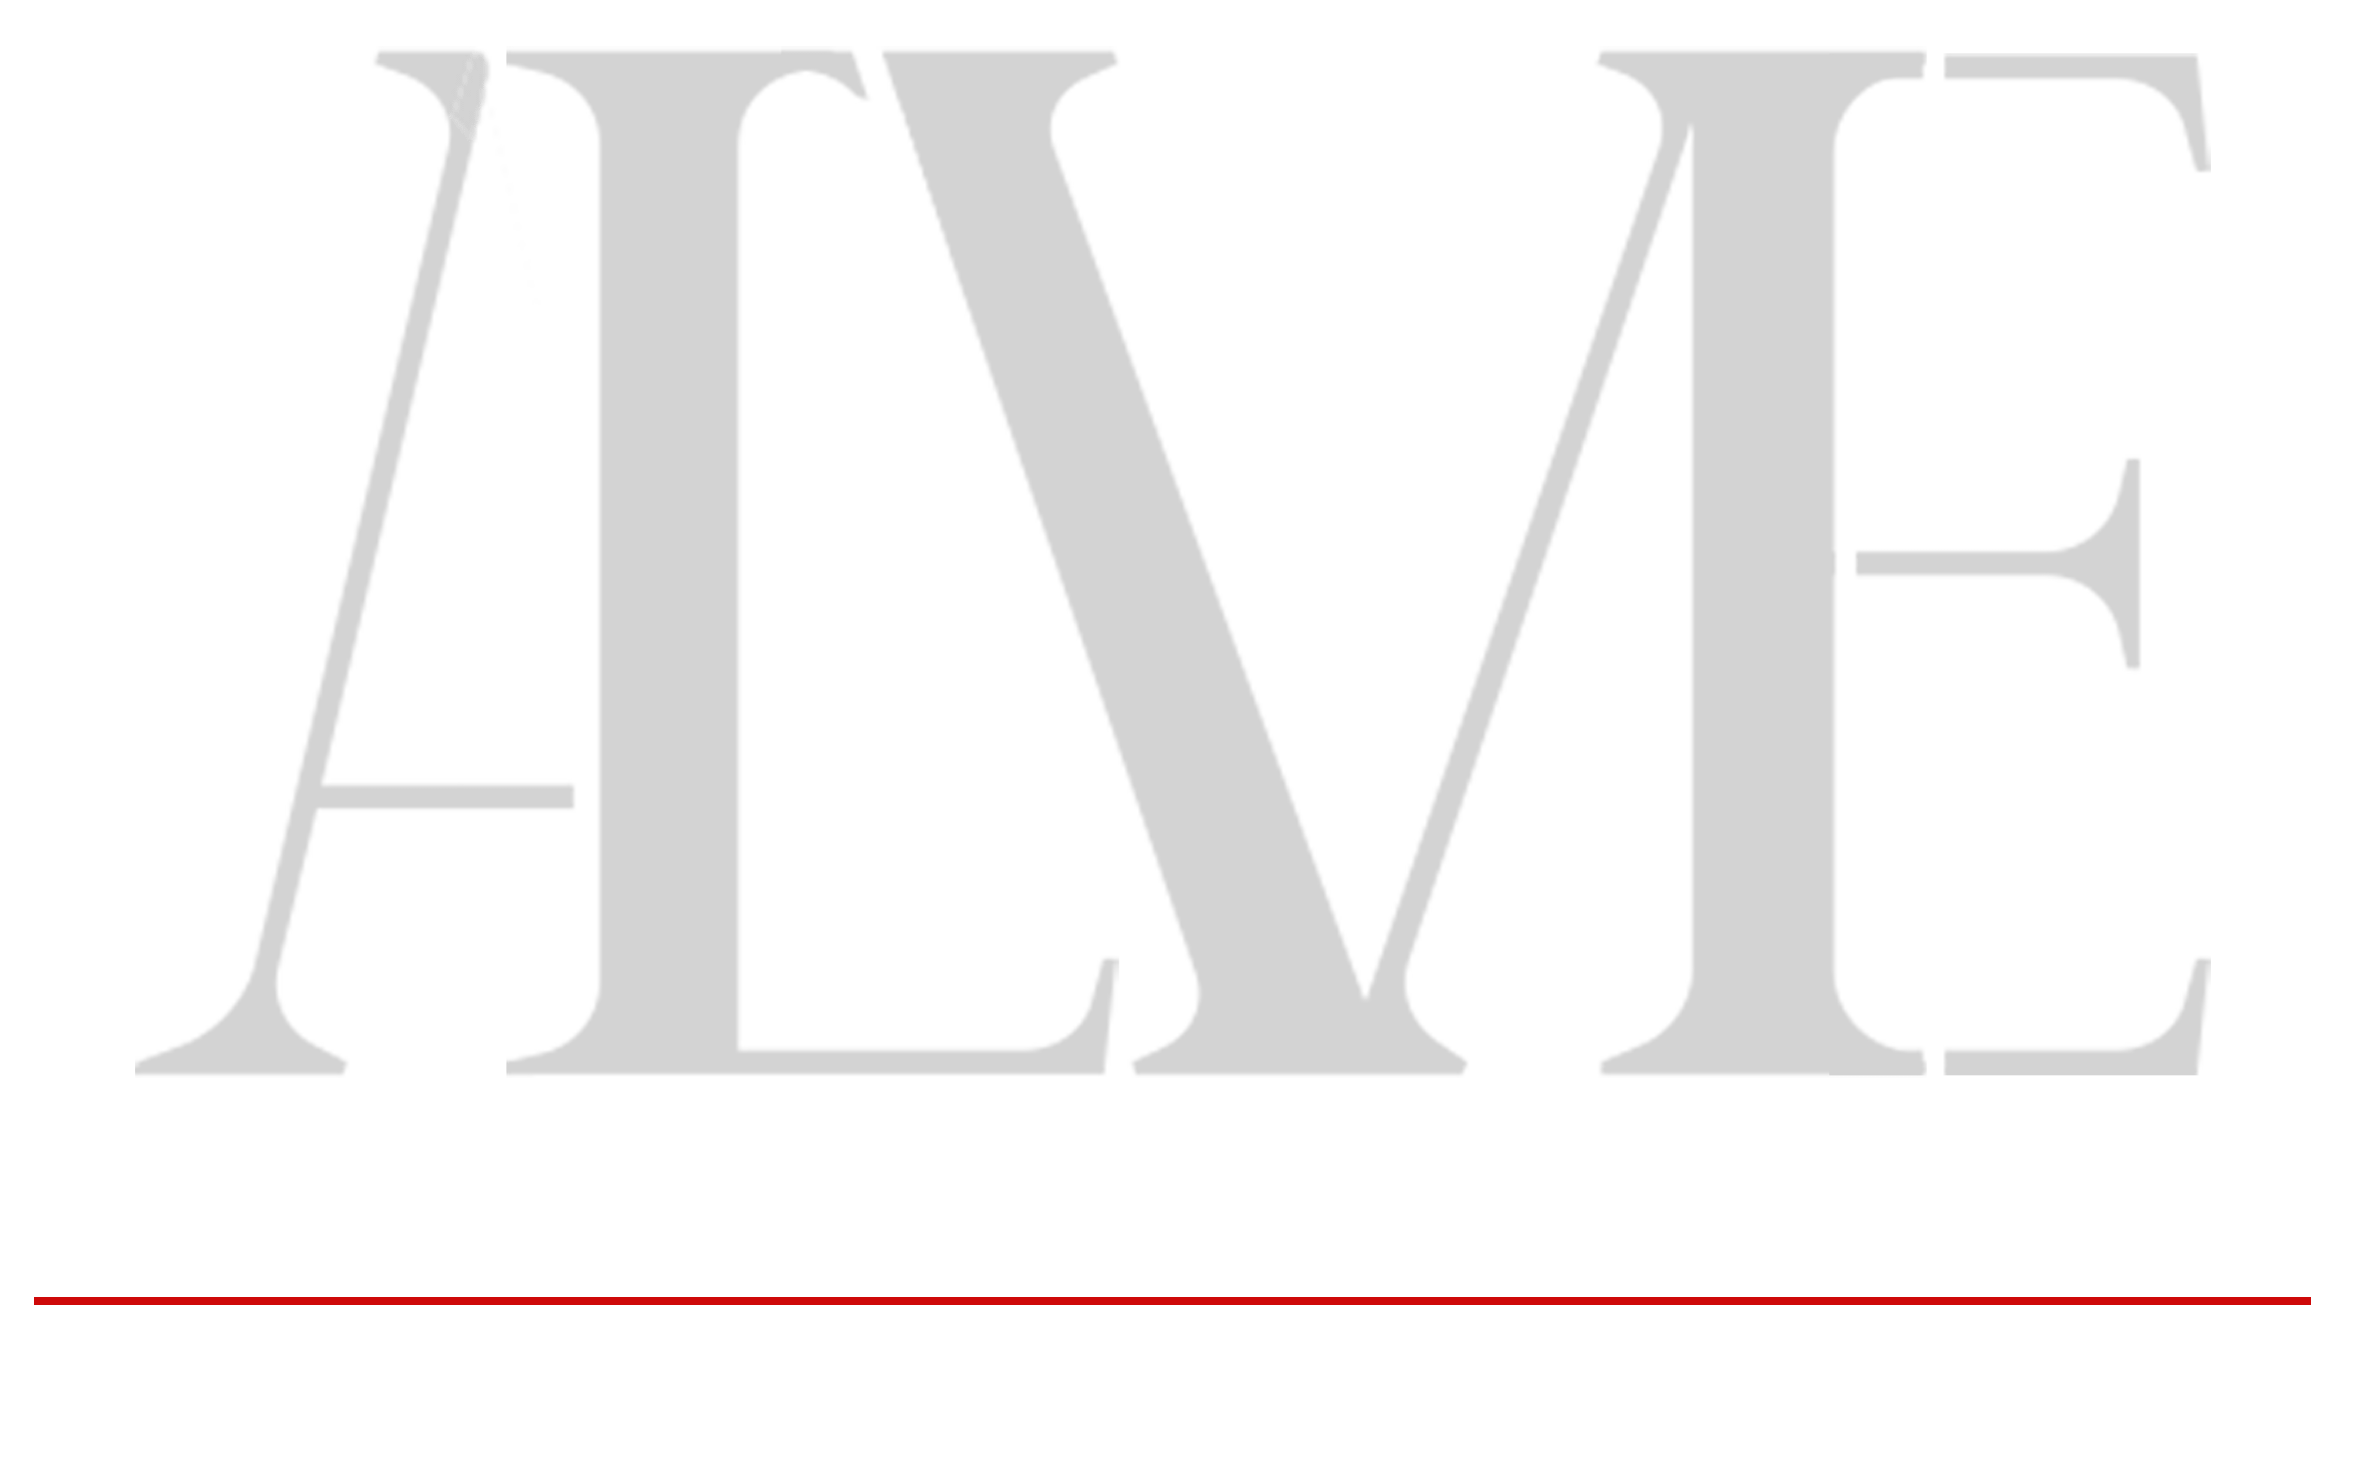 ALME - Archi & Luxury Middle East